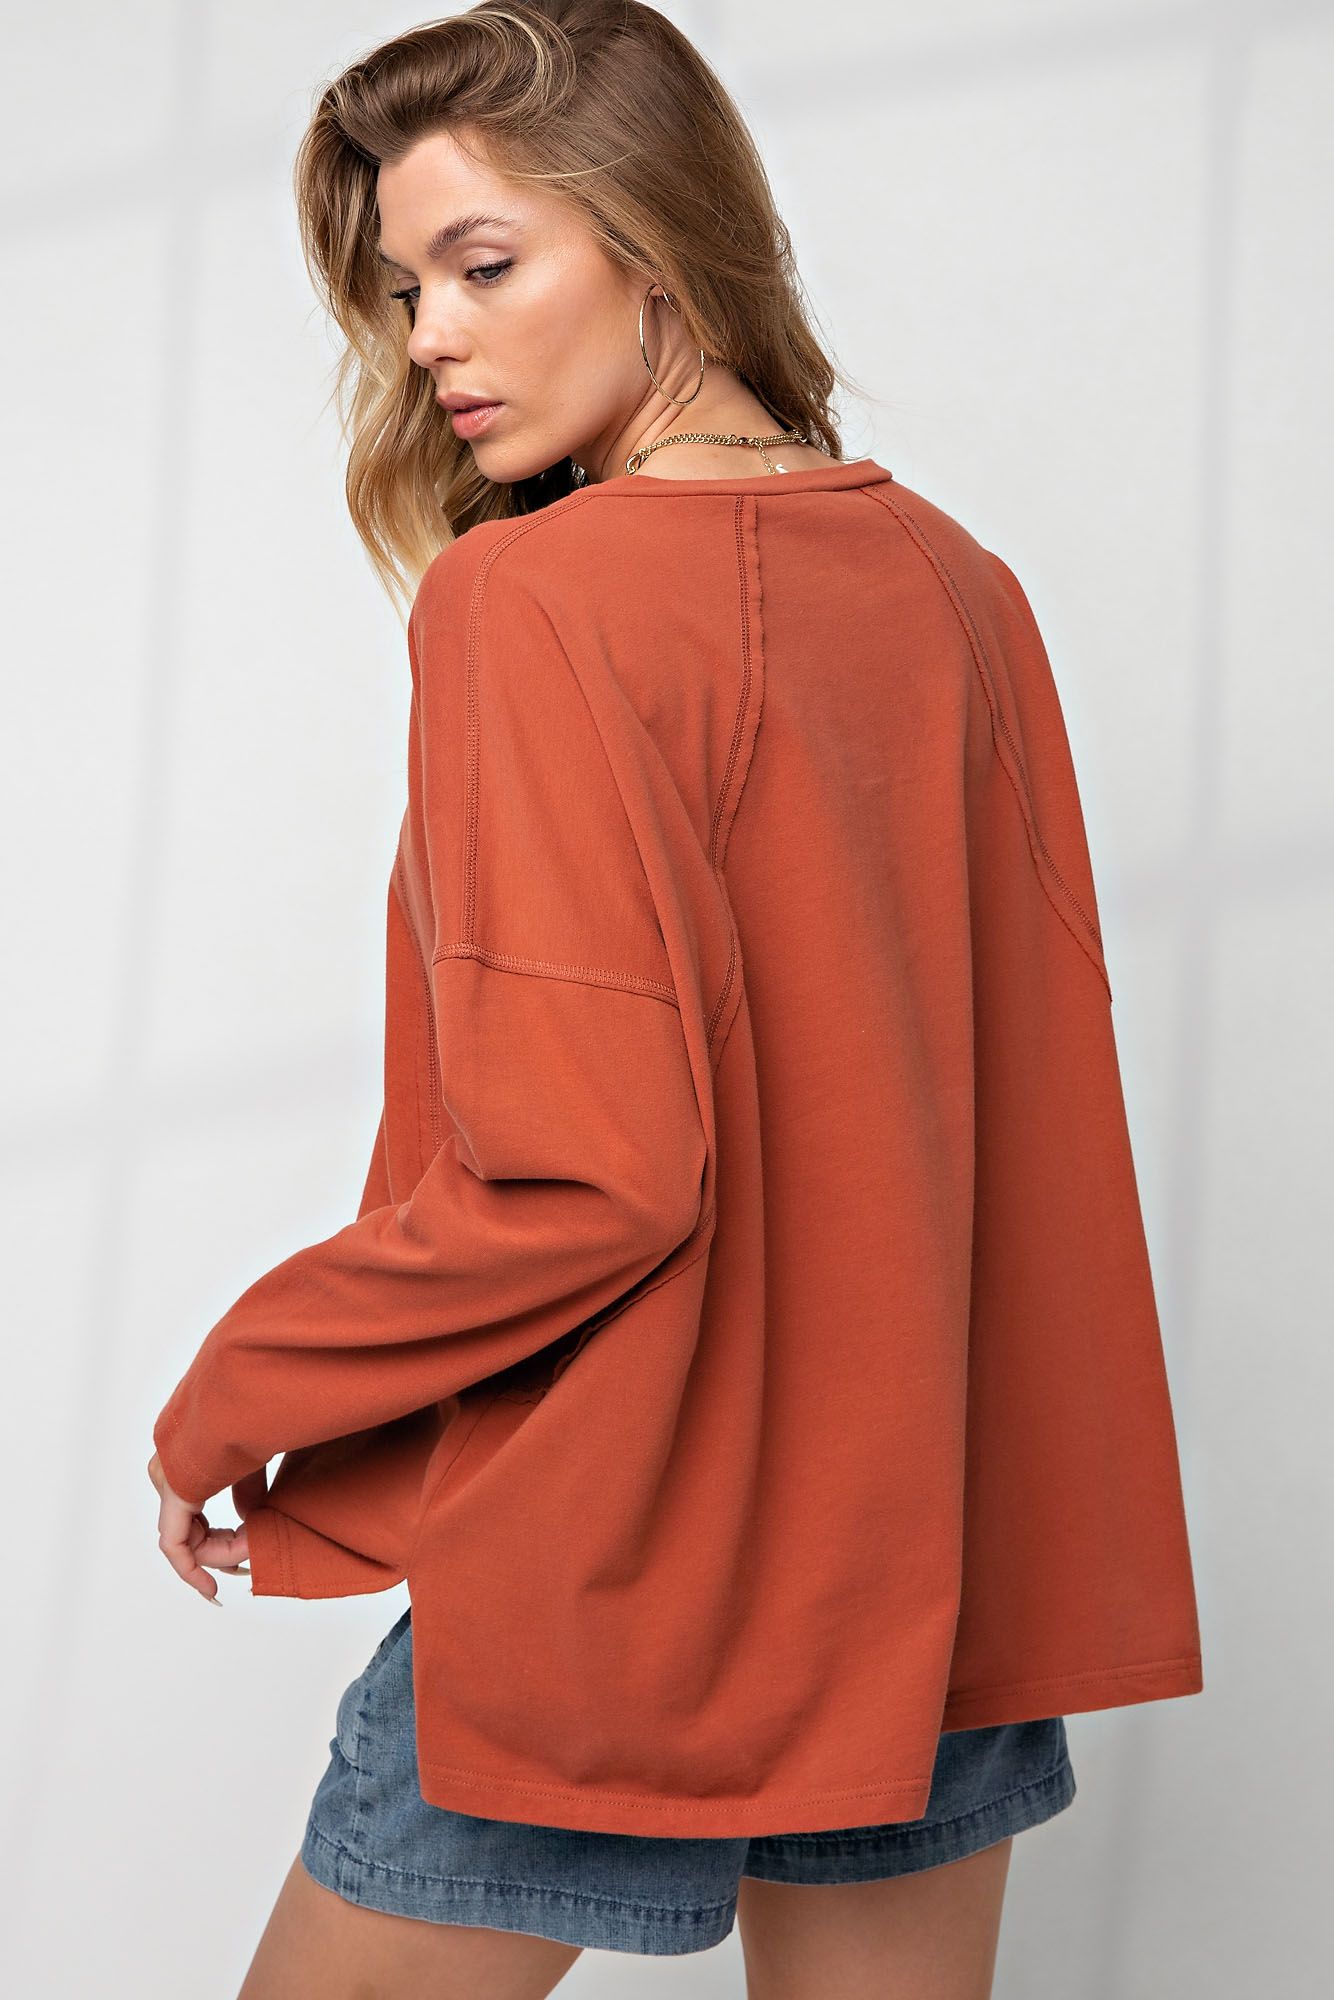 Easel Exposed Seam Long Sleeve Cotton Jersey Boxy Knit Oversized Top - Roulhac Fashion Boutique